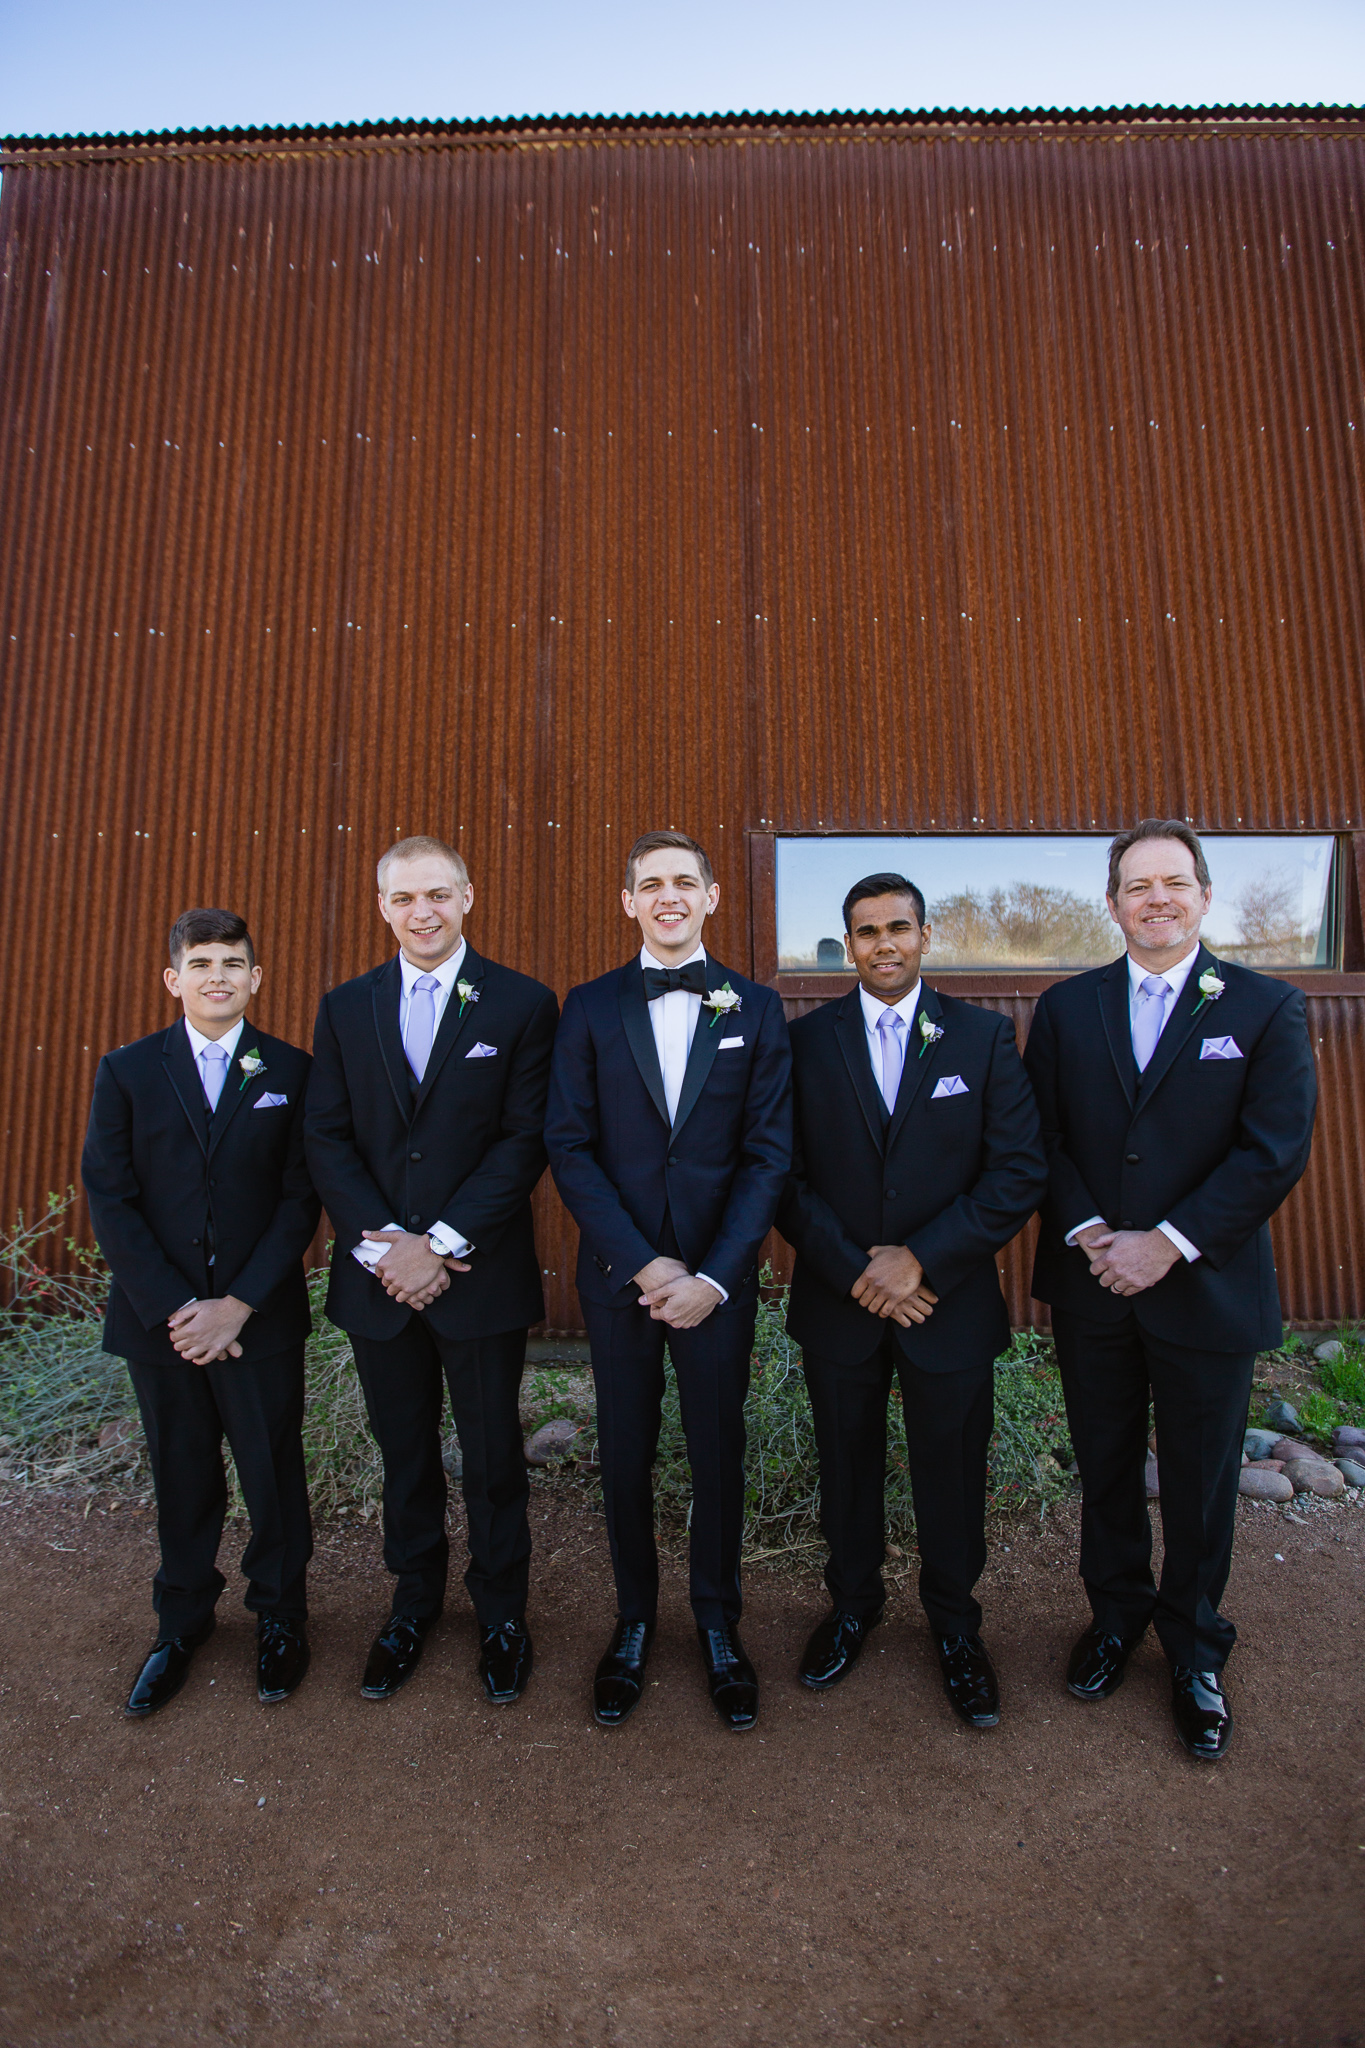 Groom with groomsmen in black suits with lavender ties at the Rio Salado Audubon Center by Phoenix wedding photographers PMA Photography.